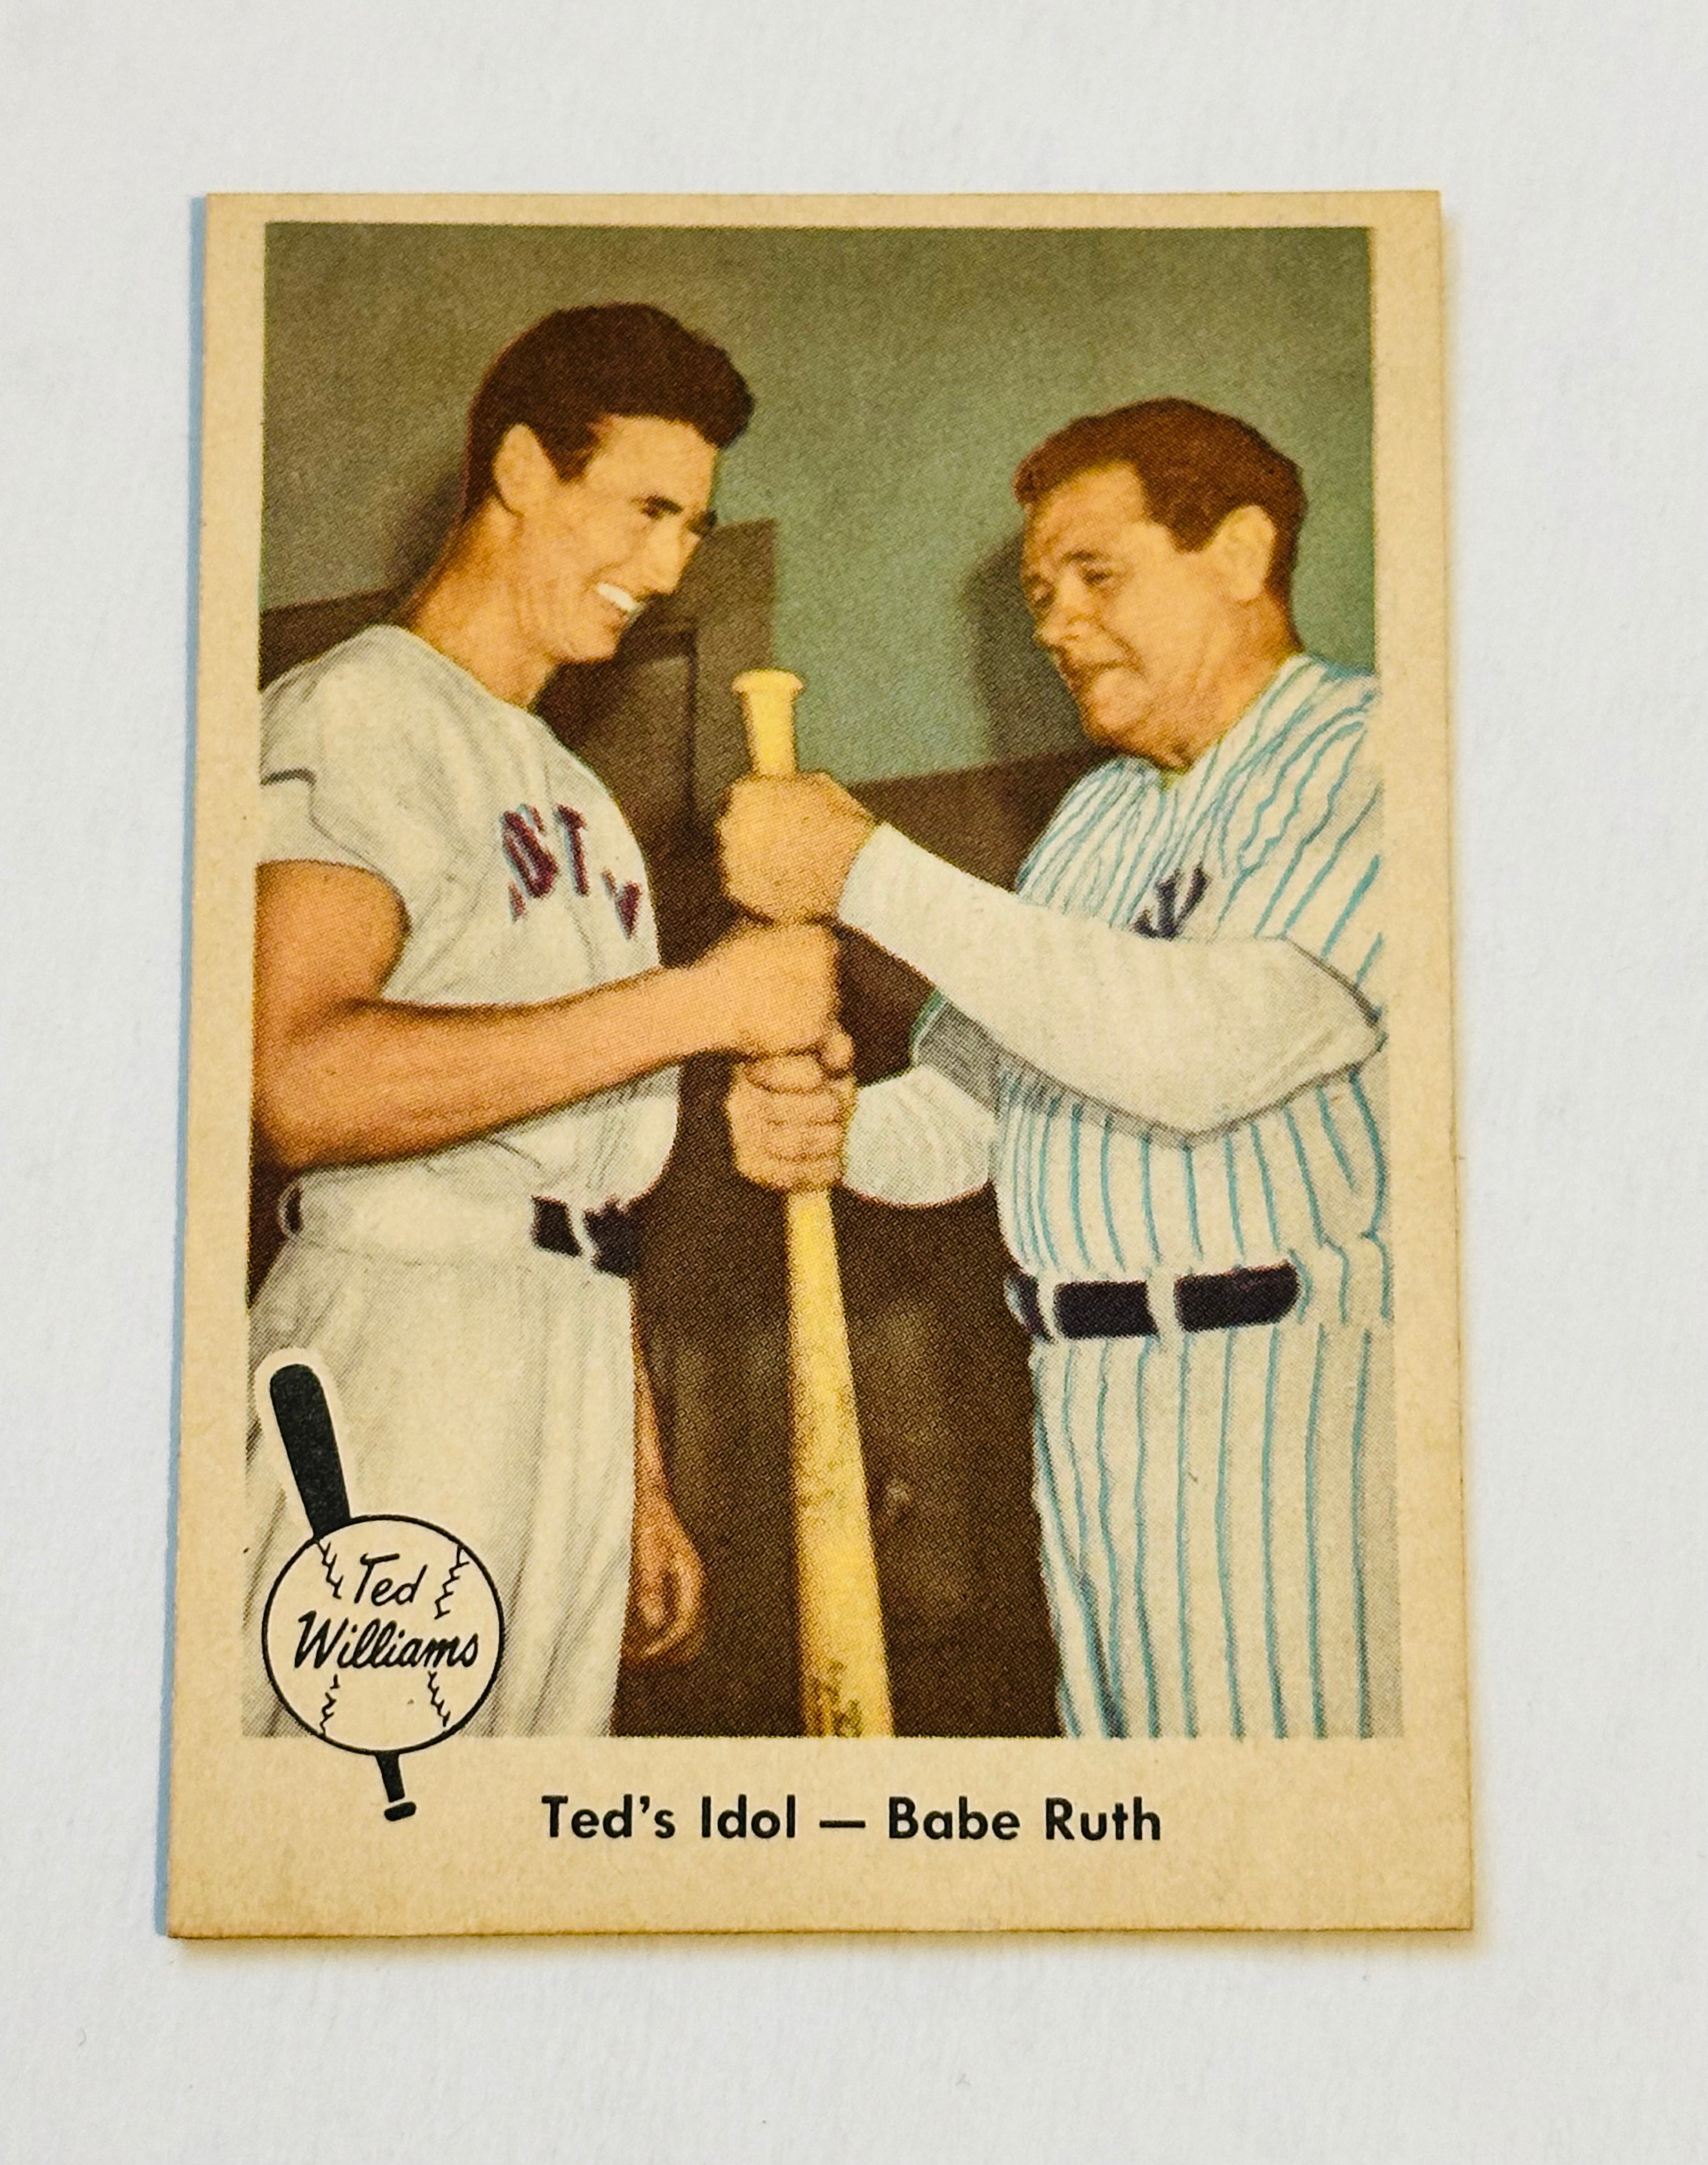 Babe Ruth and Ted Williams #2 high grade condition Fleer baseball card 1959